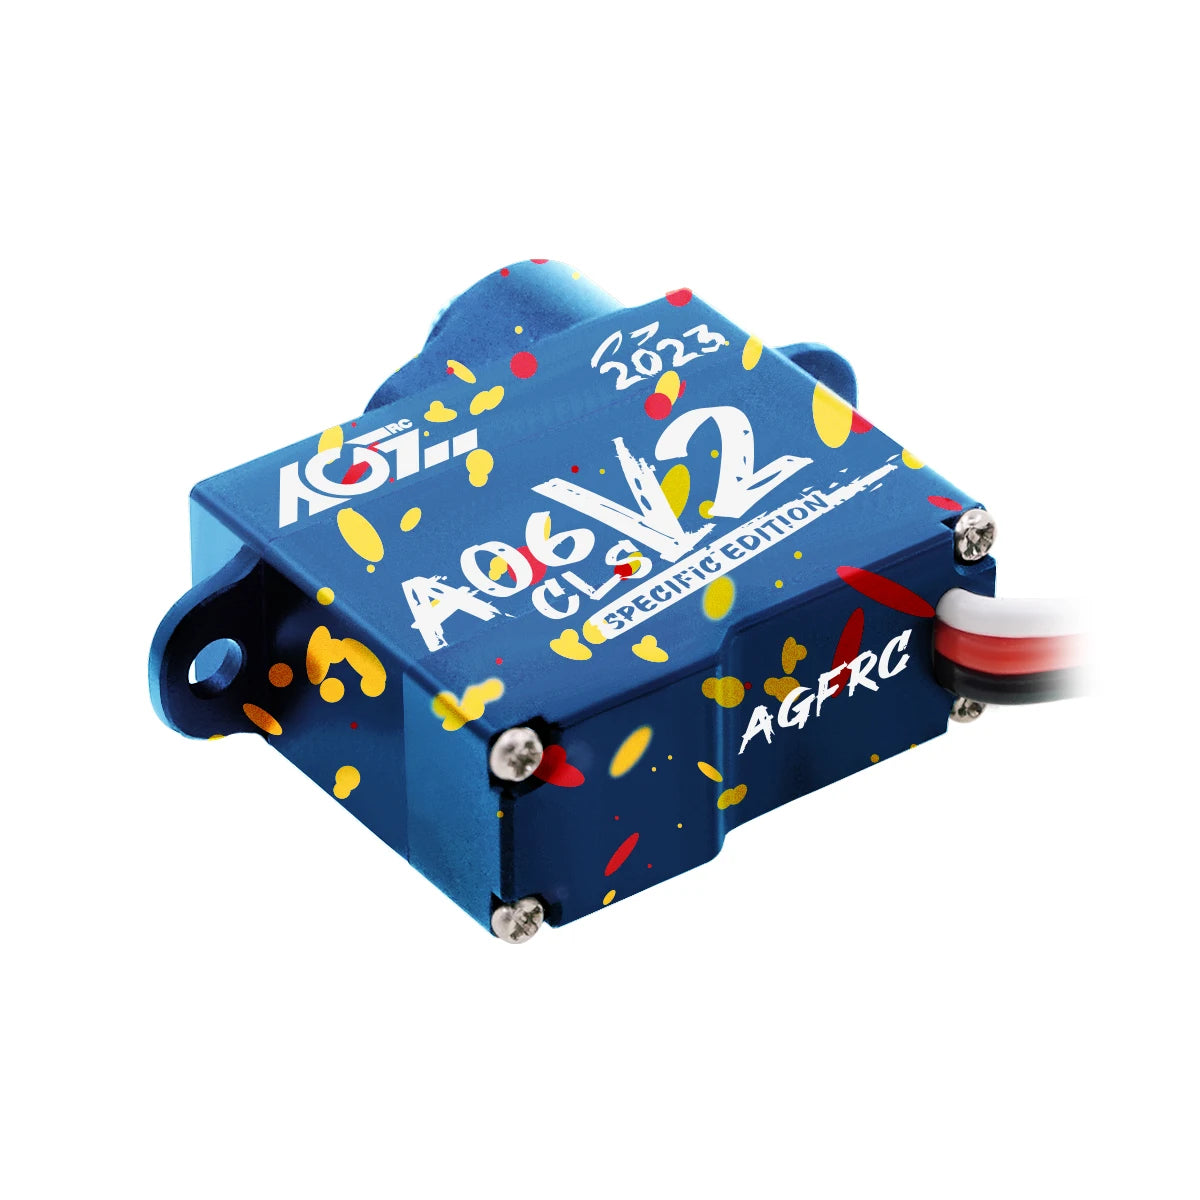 since 2009, AGFRC has been focus on all series of RC servos